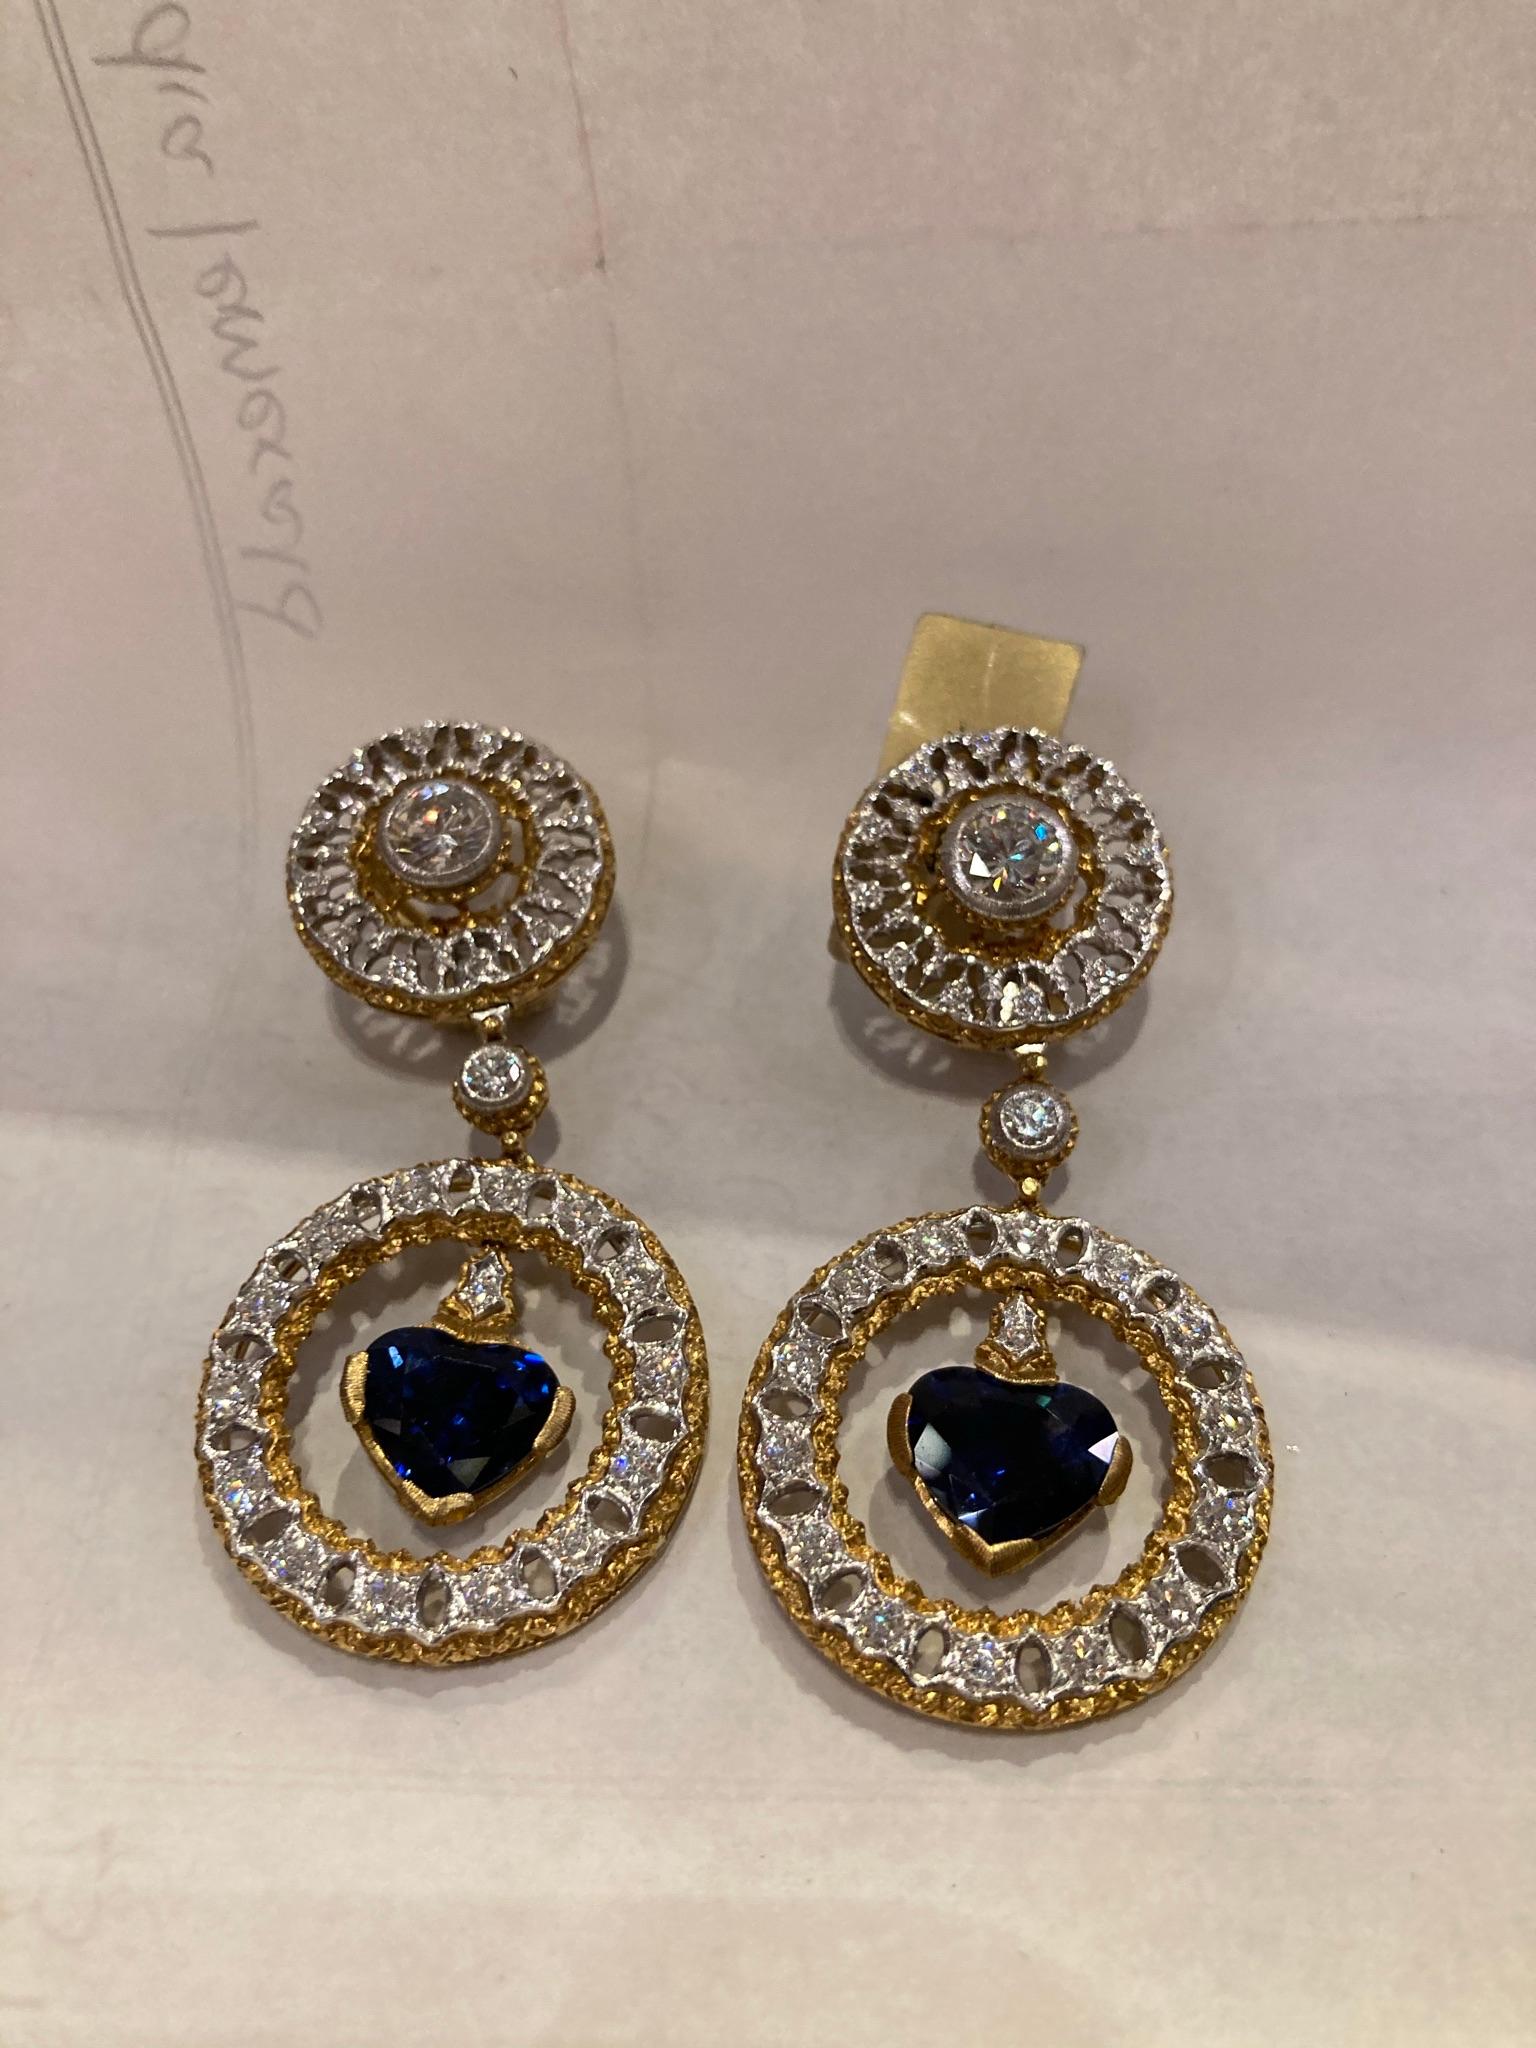 A sumptuous pair of Buccellati earrings, showcasing 5.50 carats of heart shaped sapphires and diamonds. Made in Italy, circa 1970

